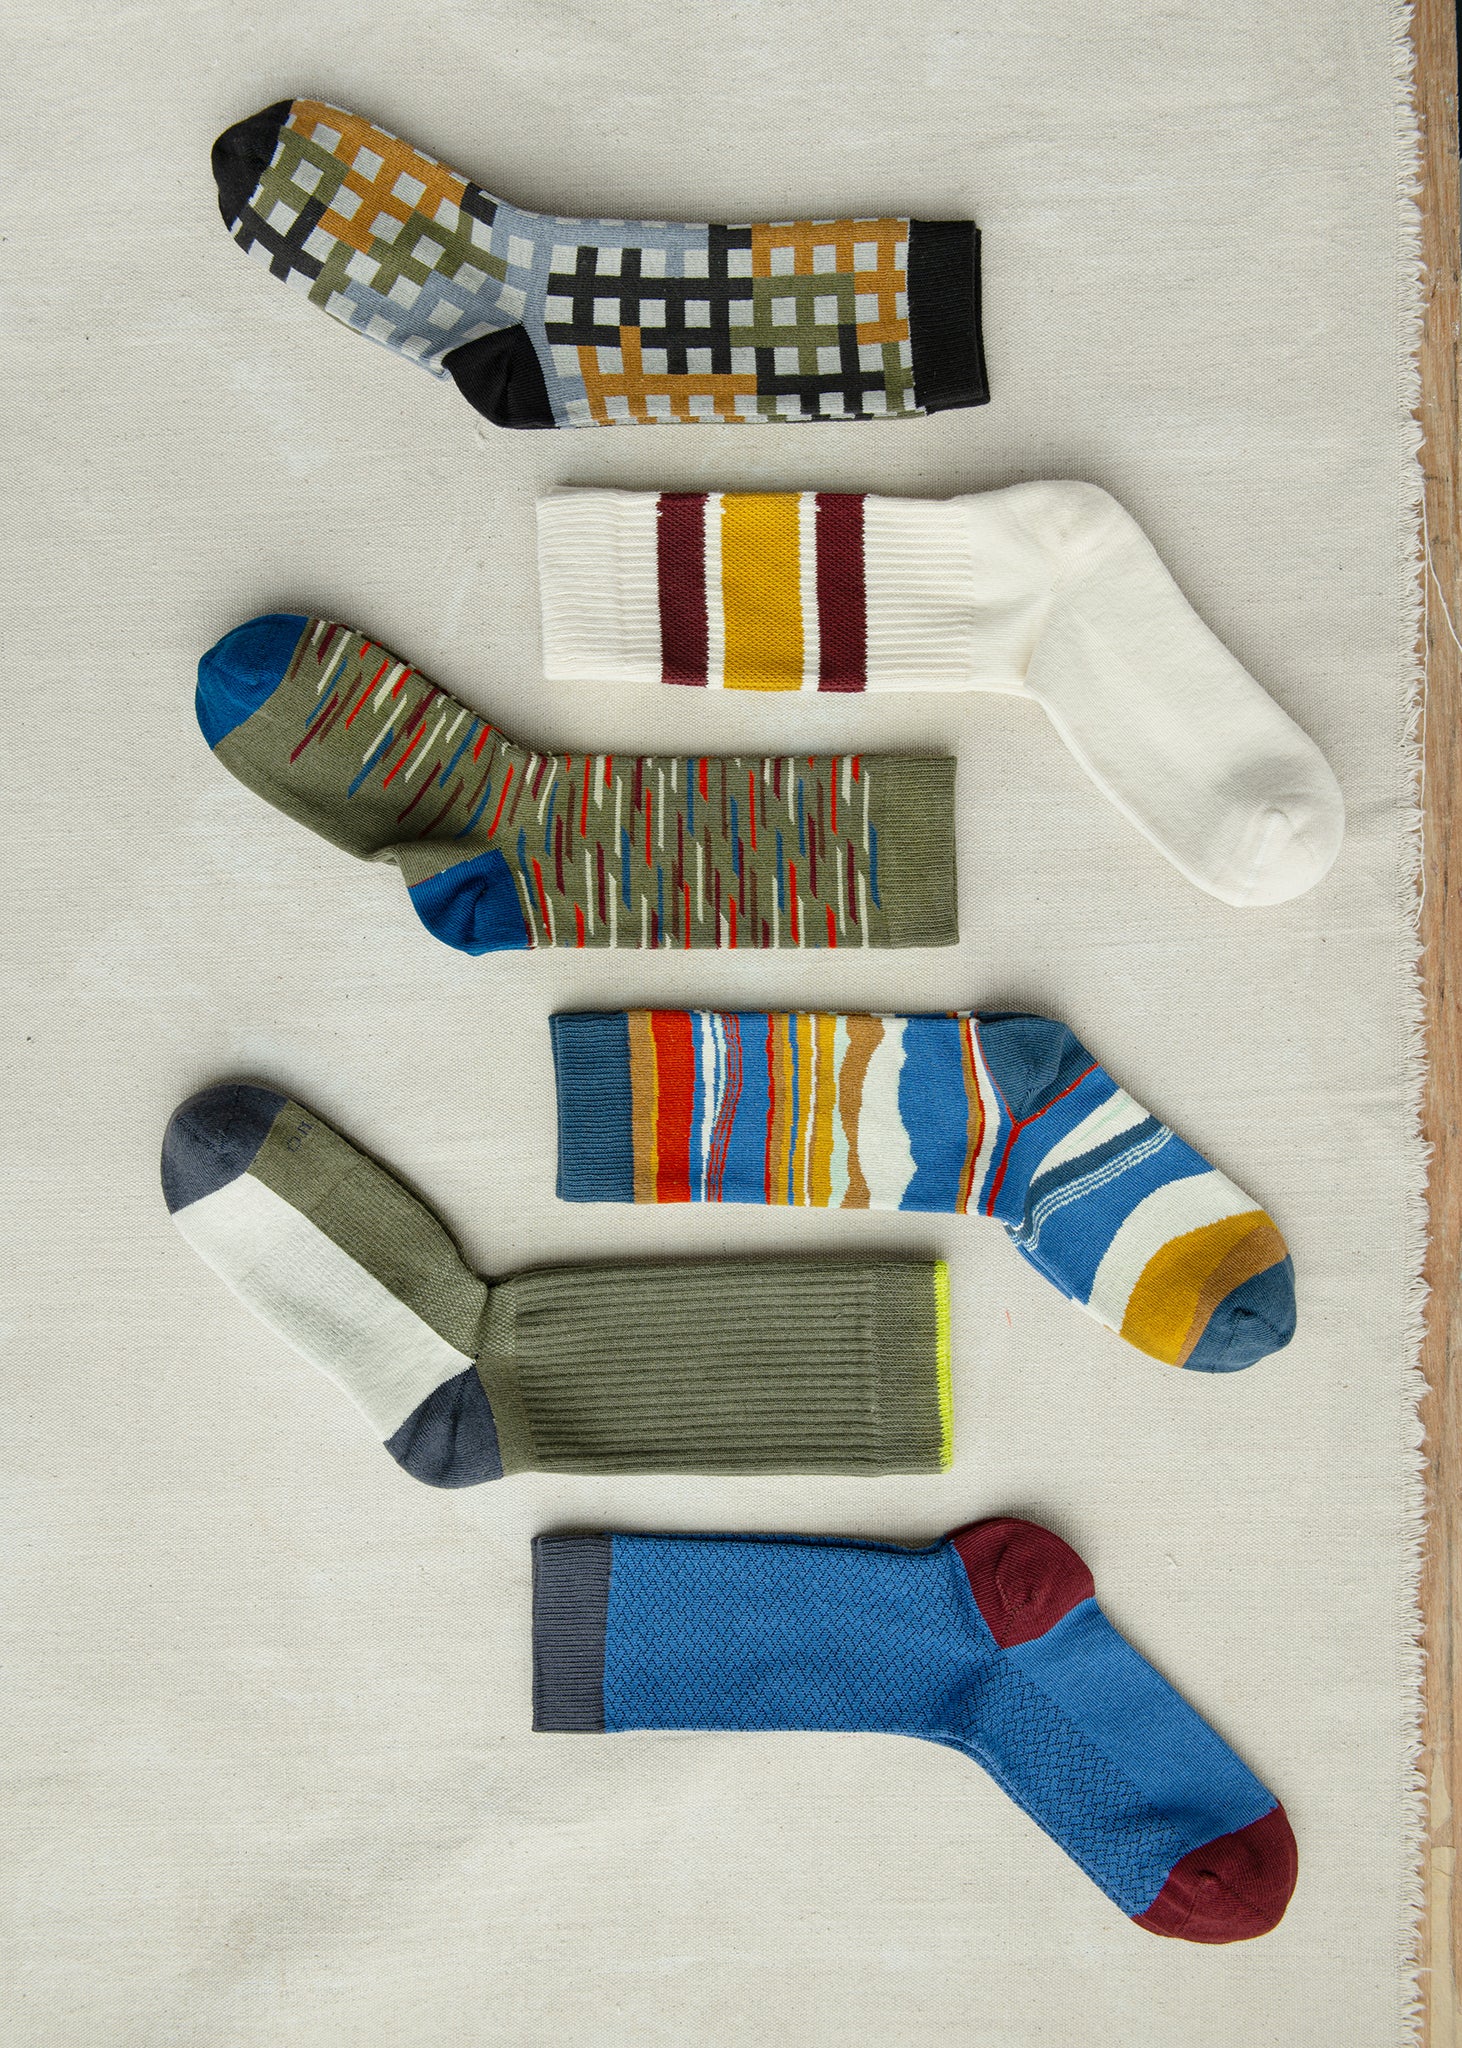 men's organic cotton socks in various styles, colors and patterns laying on a tan surface